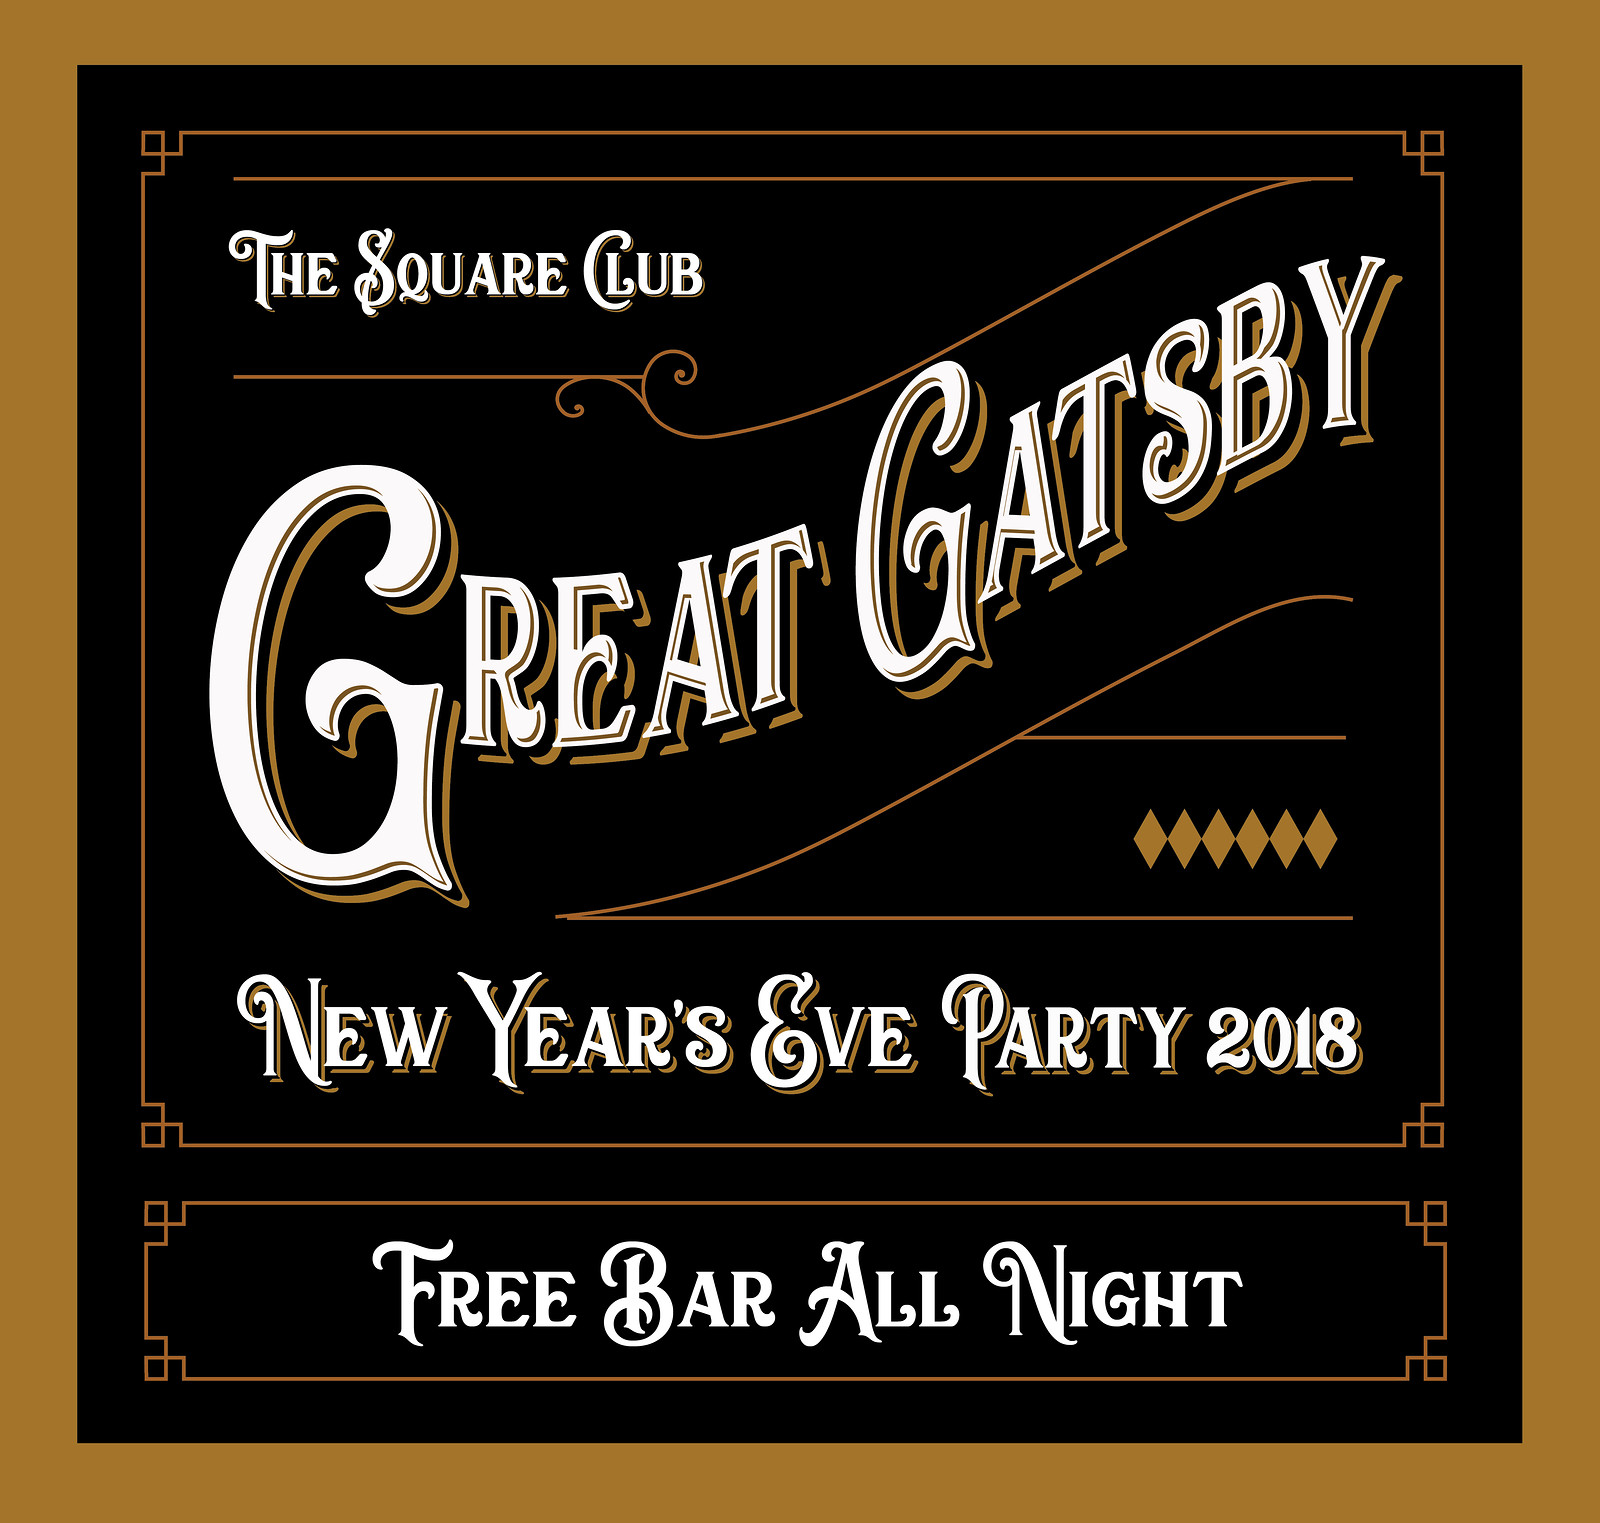 Great Gatsby New Year's Eve 2018 @ The Square Club at The Square Club